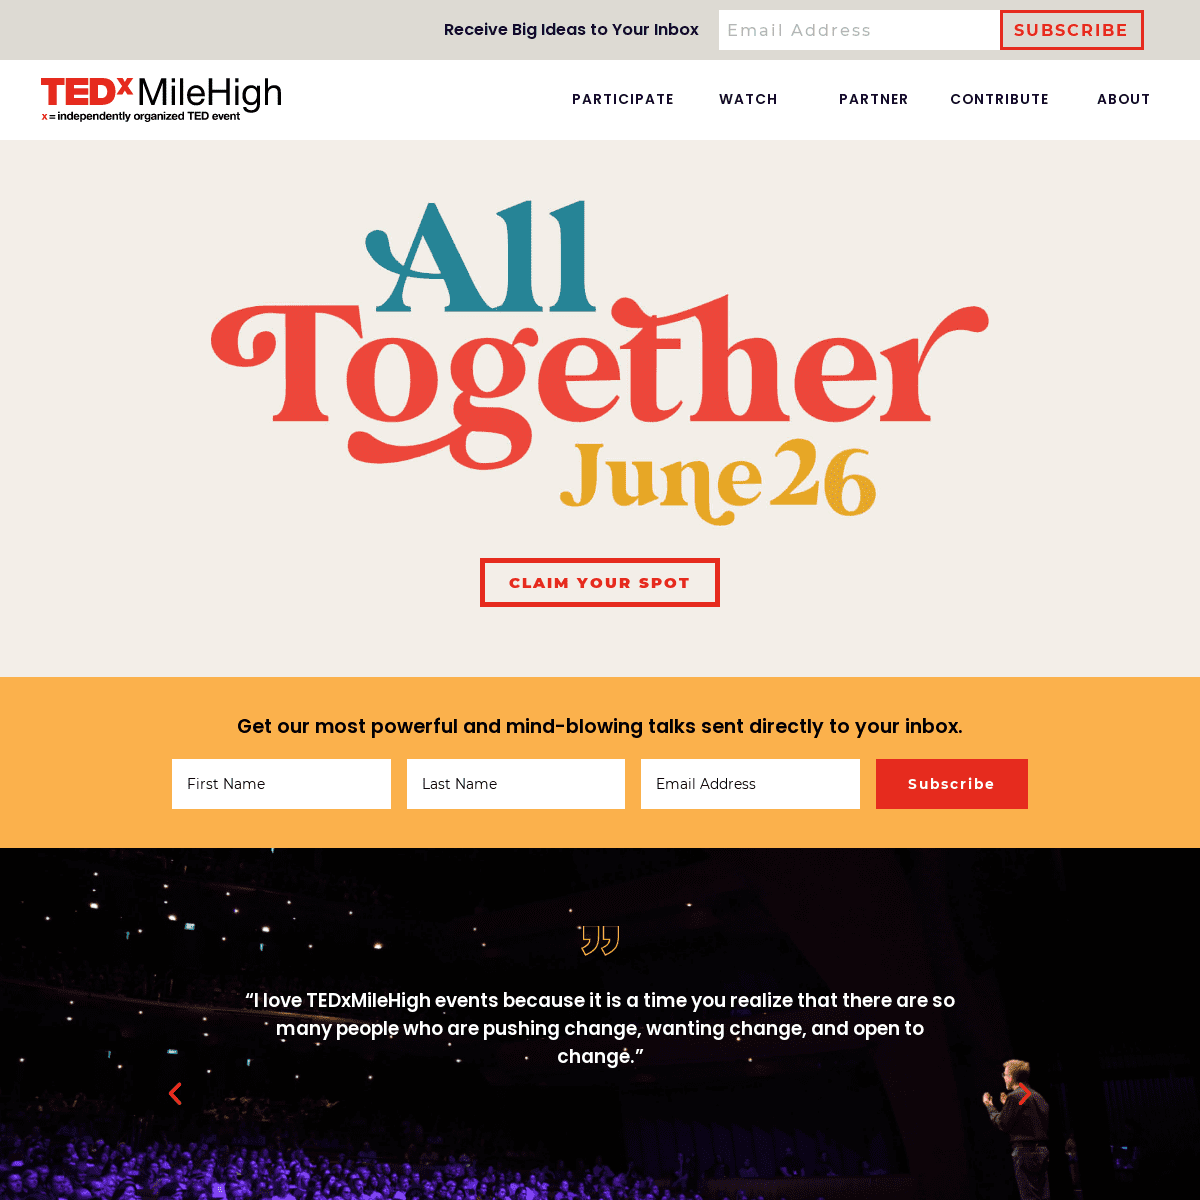 A complete backup of https://tedxmilehigh.com